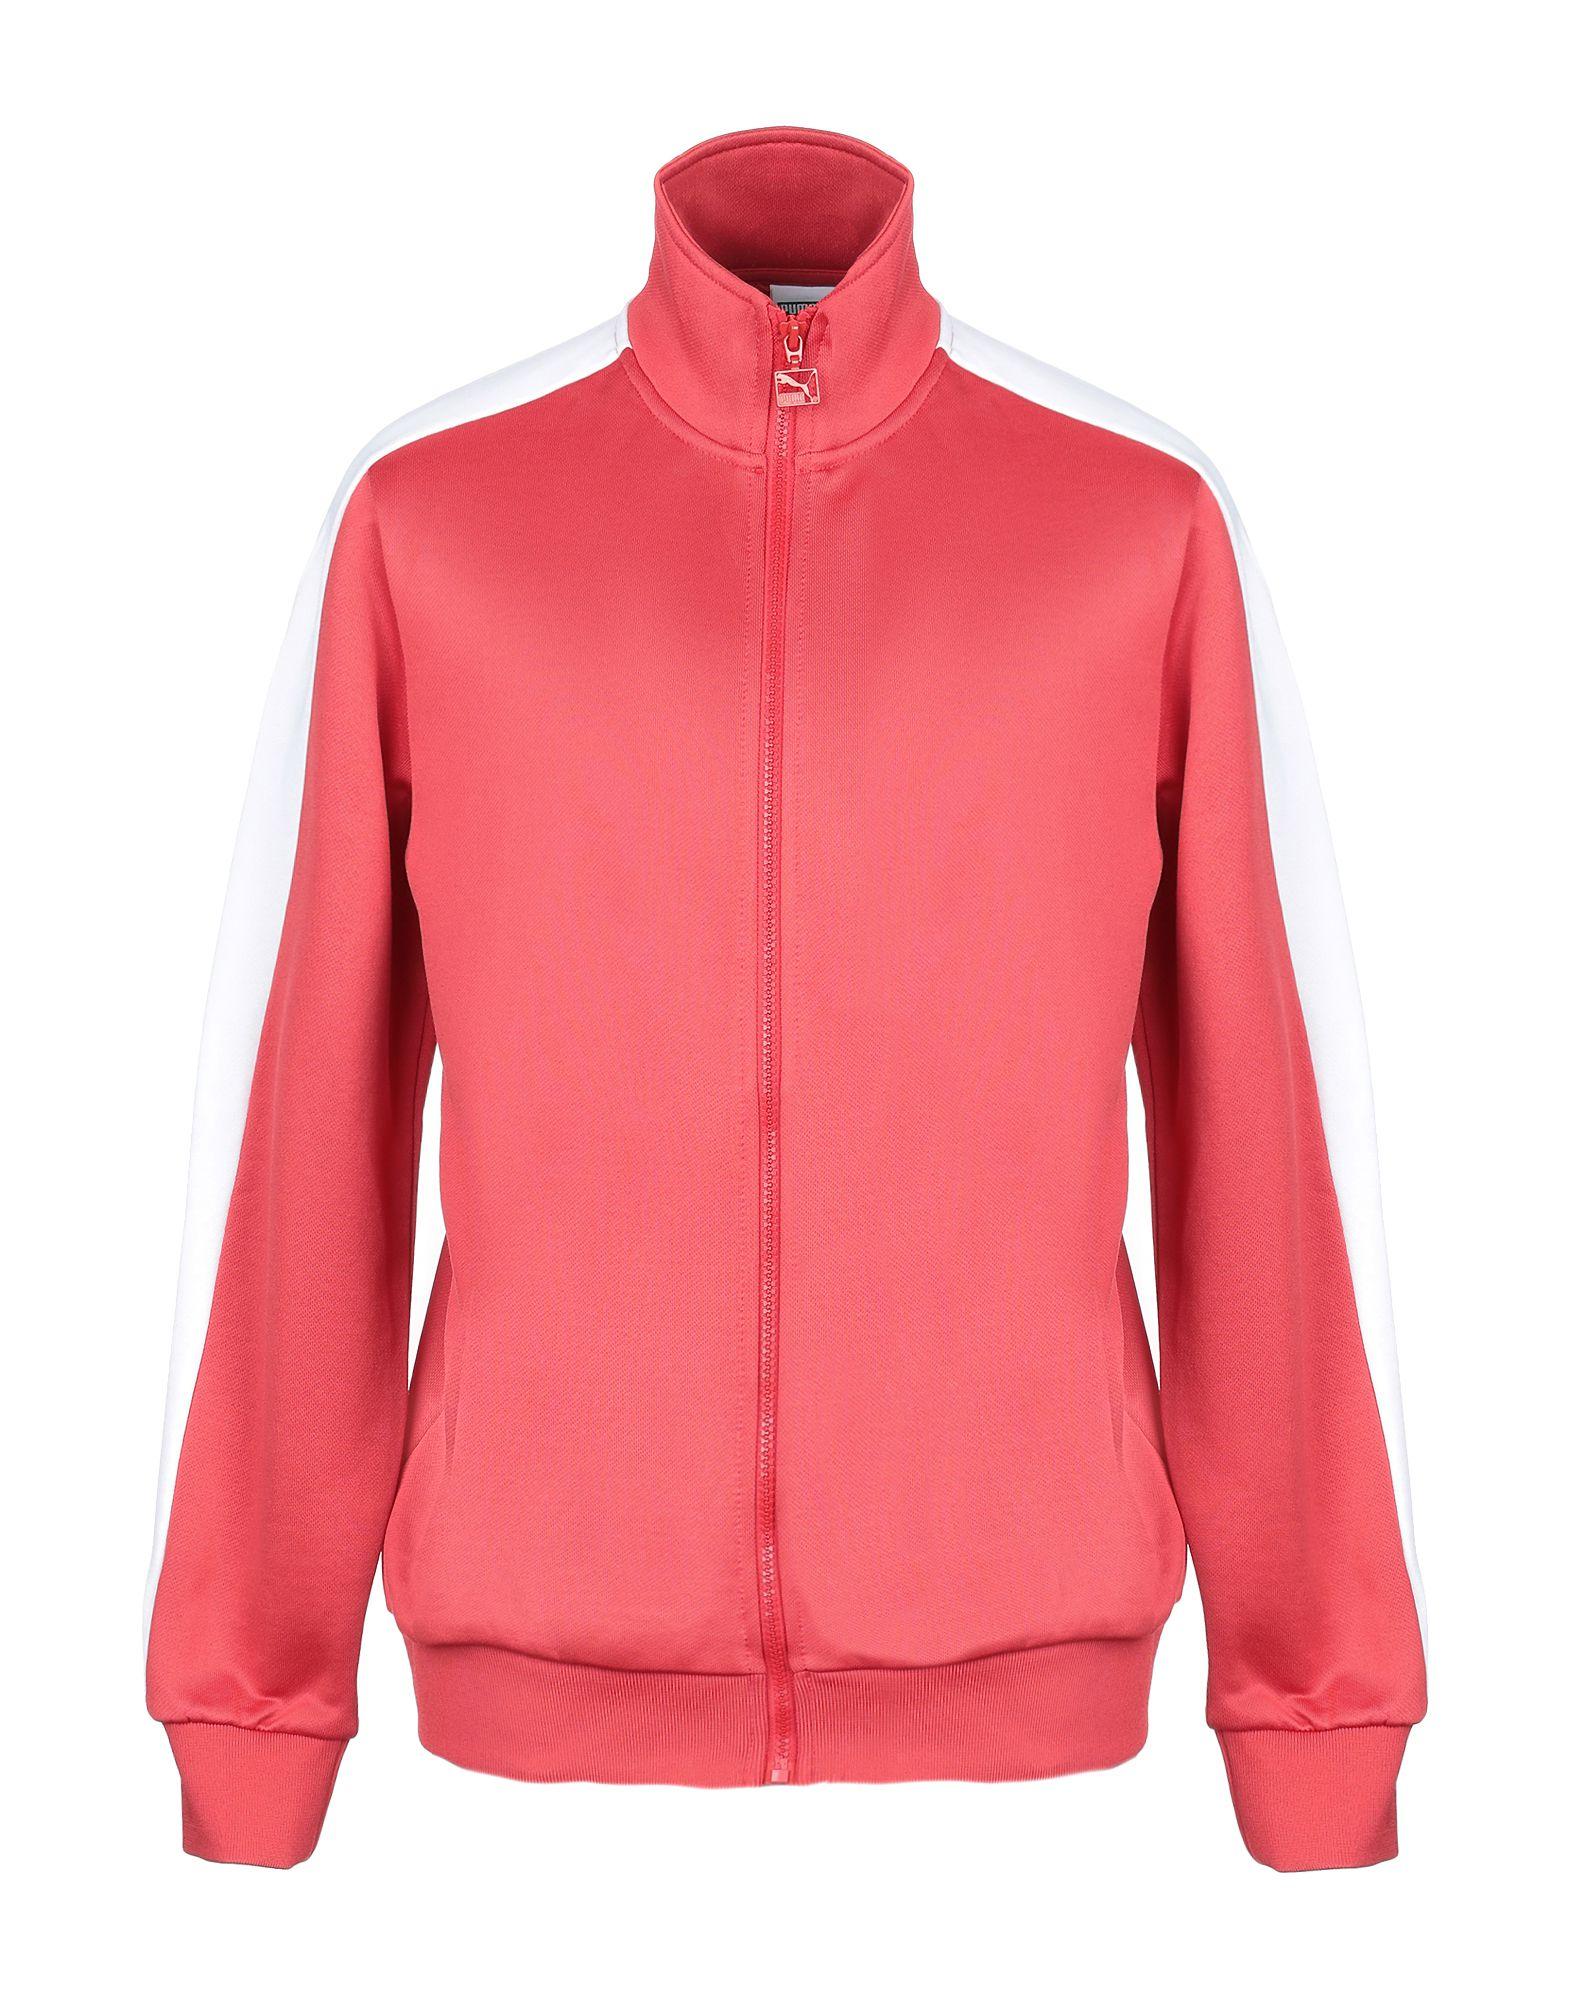 PUMA Synthetic Sweatshirt in Red for Men - Lyst